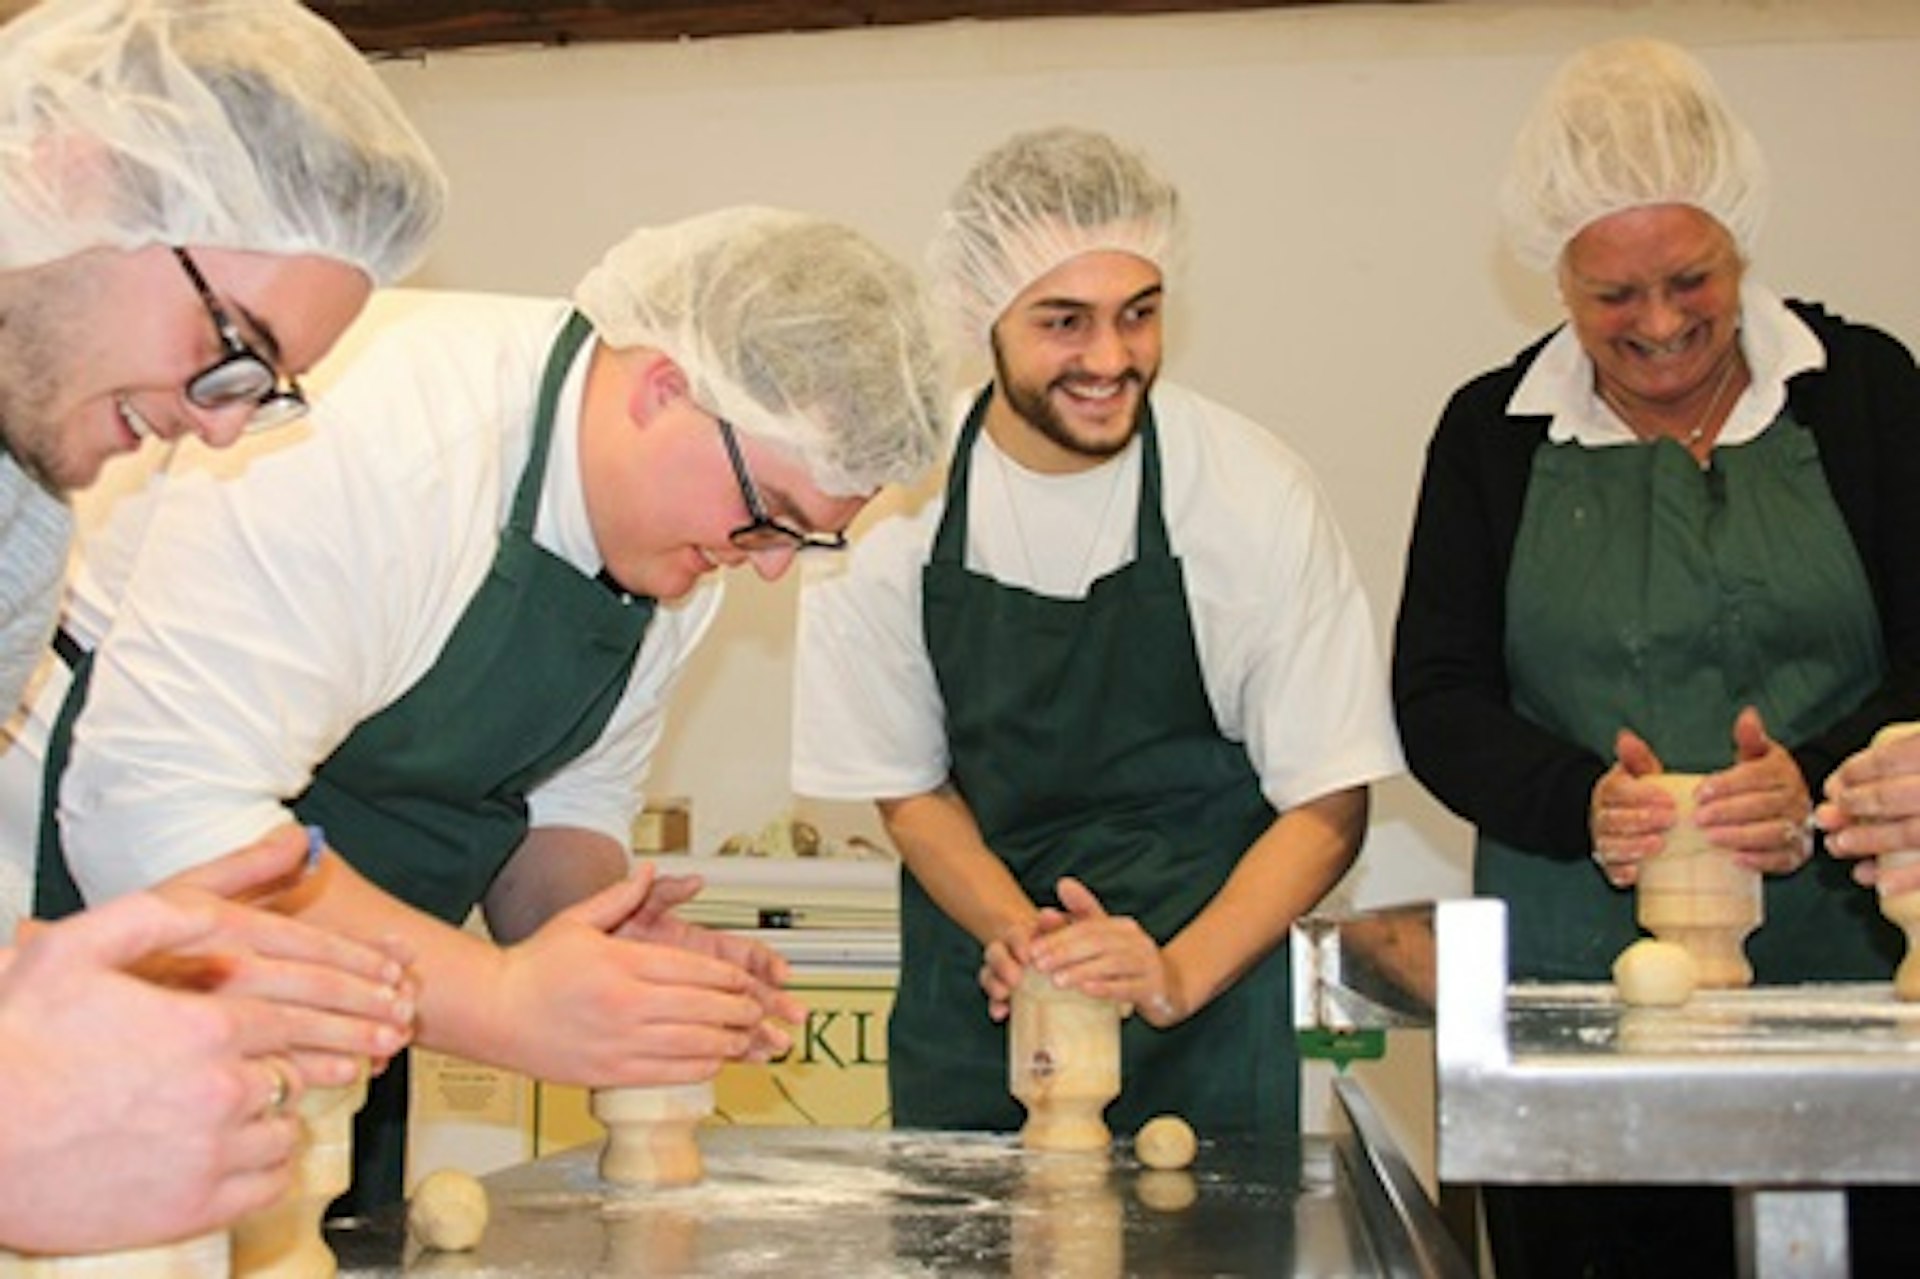 Pork Pie Making Workshop with Ploughman's Lunch for Two at Brockleby's Bakery, Melton Mowbray 1